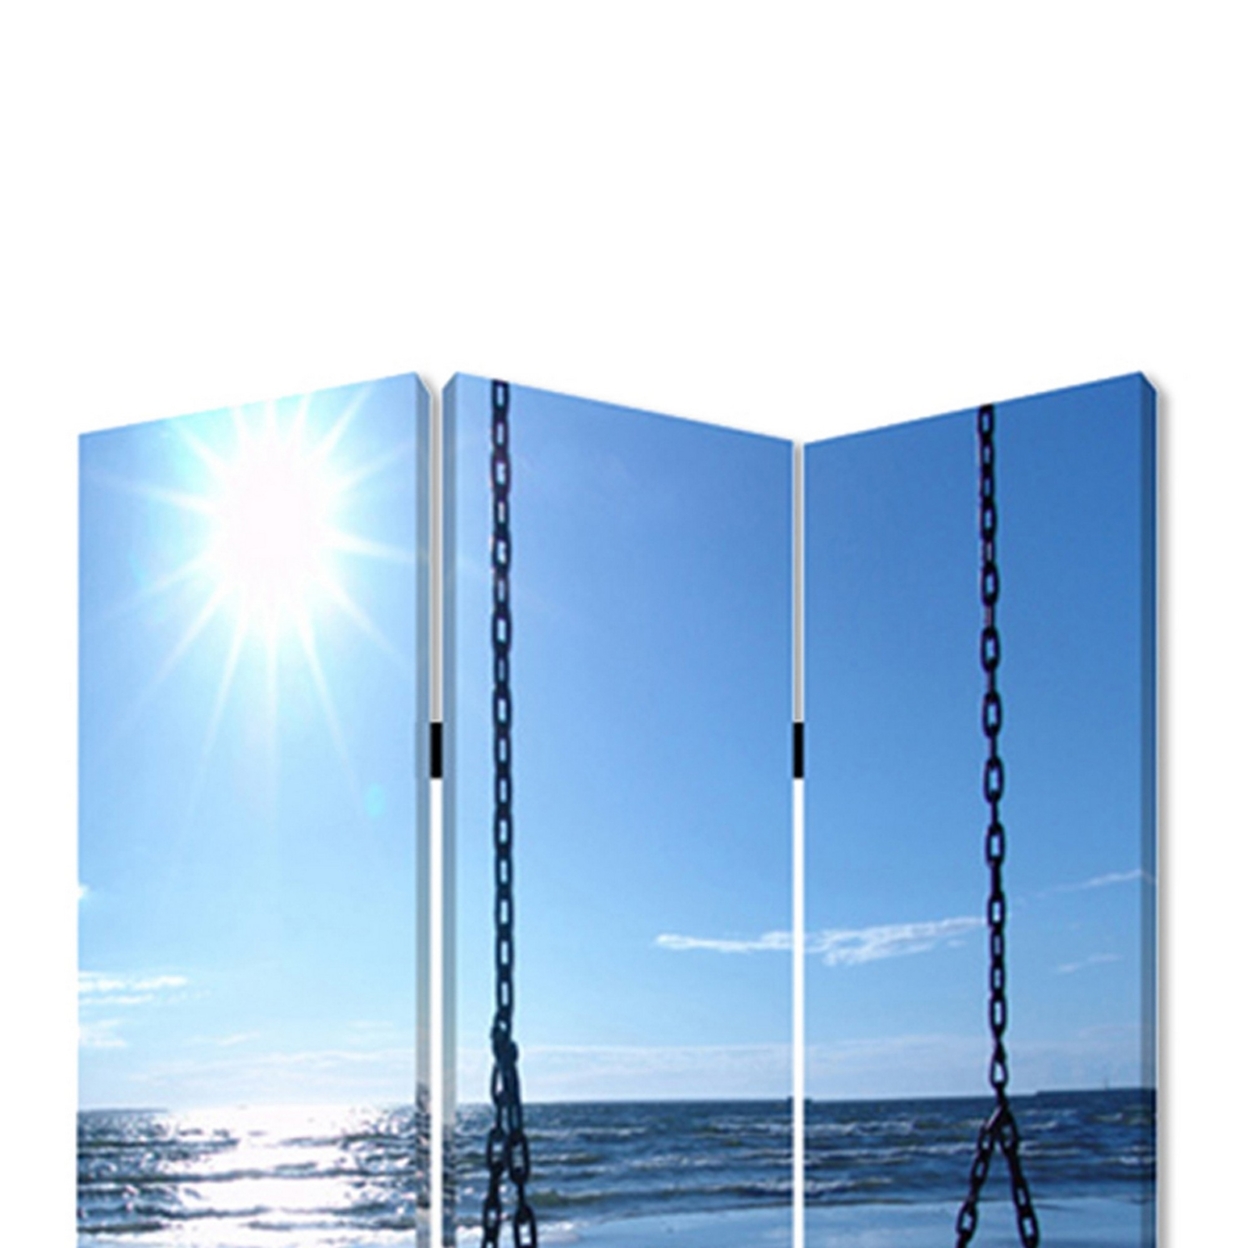 Wooden 3 Panel Room Divider With Seaside Screen Pattern, Blue And Gray- Saltoro Sherpi